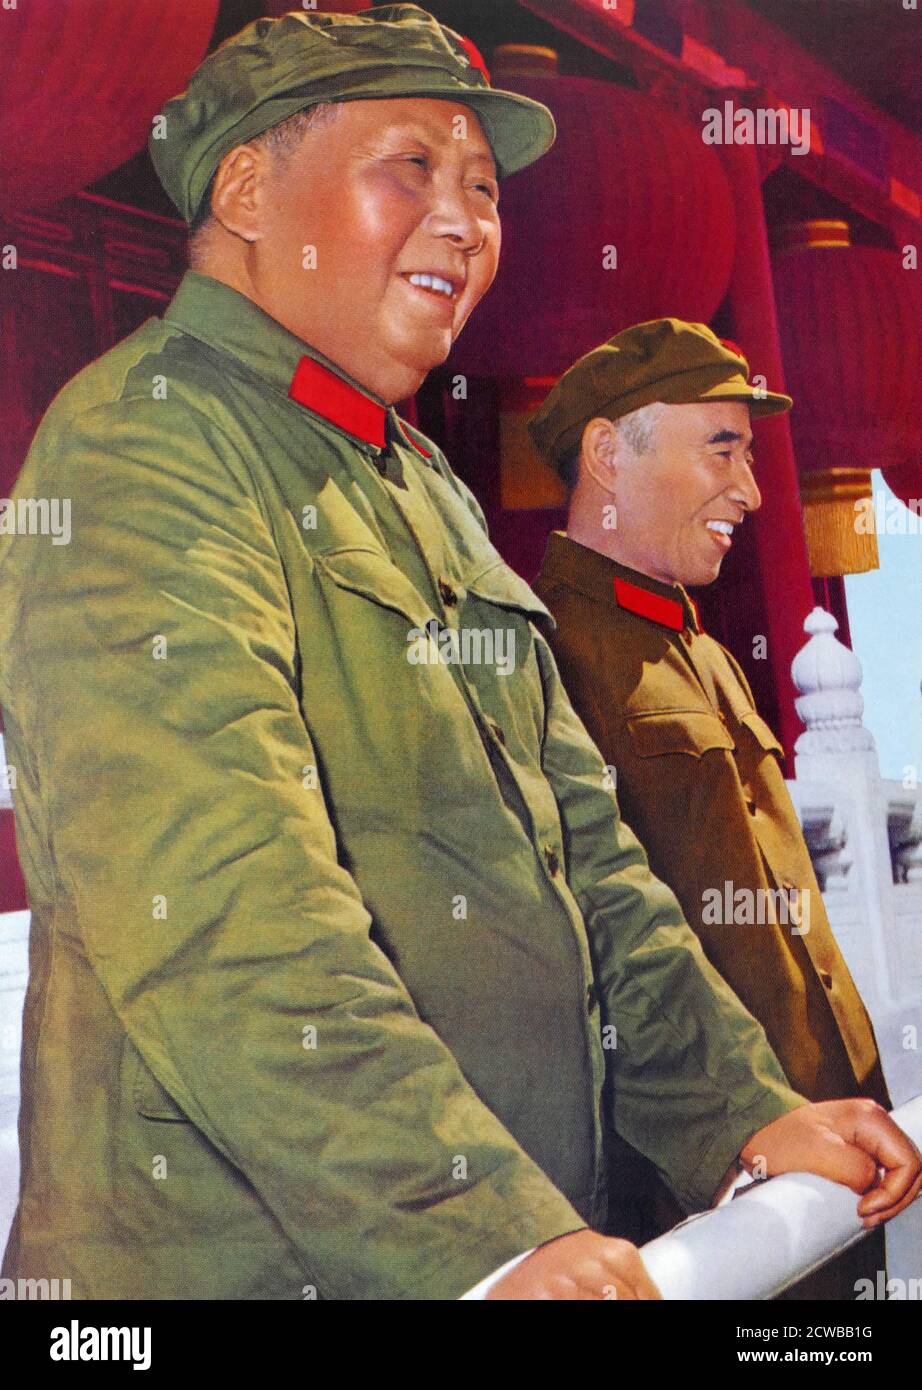 A propaganda image of Mao Zedong with Lin Biao, celebrating the anniversary of the People's Republic of China in 1966. Lin Biao (1907 - 1971). Lin became instrumental in creating the foundations for Mao Zedong's cult of personality, and was rewarded in the Cultural Revolution by being named Mao's designated successor. Lin died on September 13, 1971. The exact events of this 'Lin Biao incident' have been a source of speculation ever since. The Chinese government's official explanation is that Lin and his family attempted to flee following a botched coup against Mao. Stock Photo